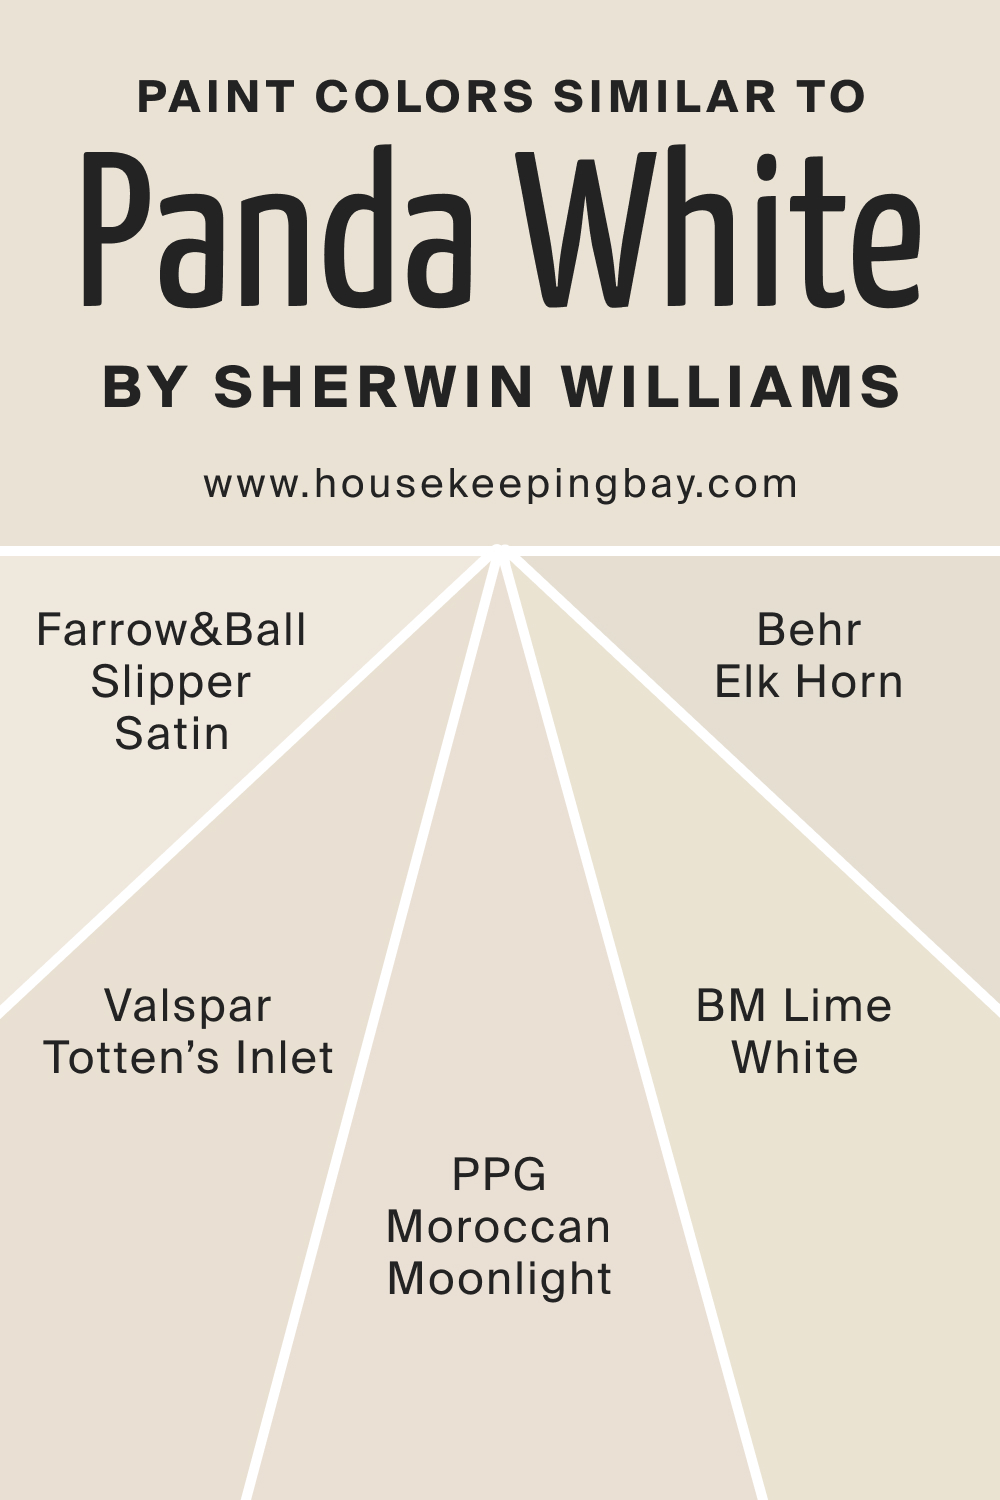 Paint Colors Similar to SW Panda White by Sherwin Williams